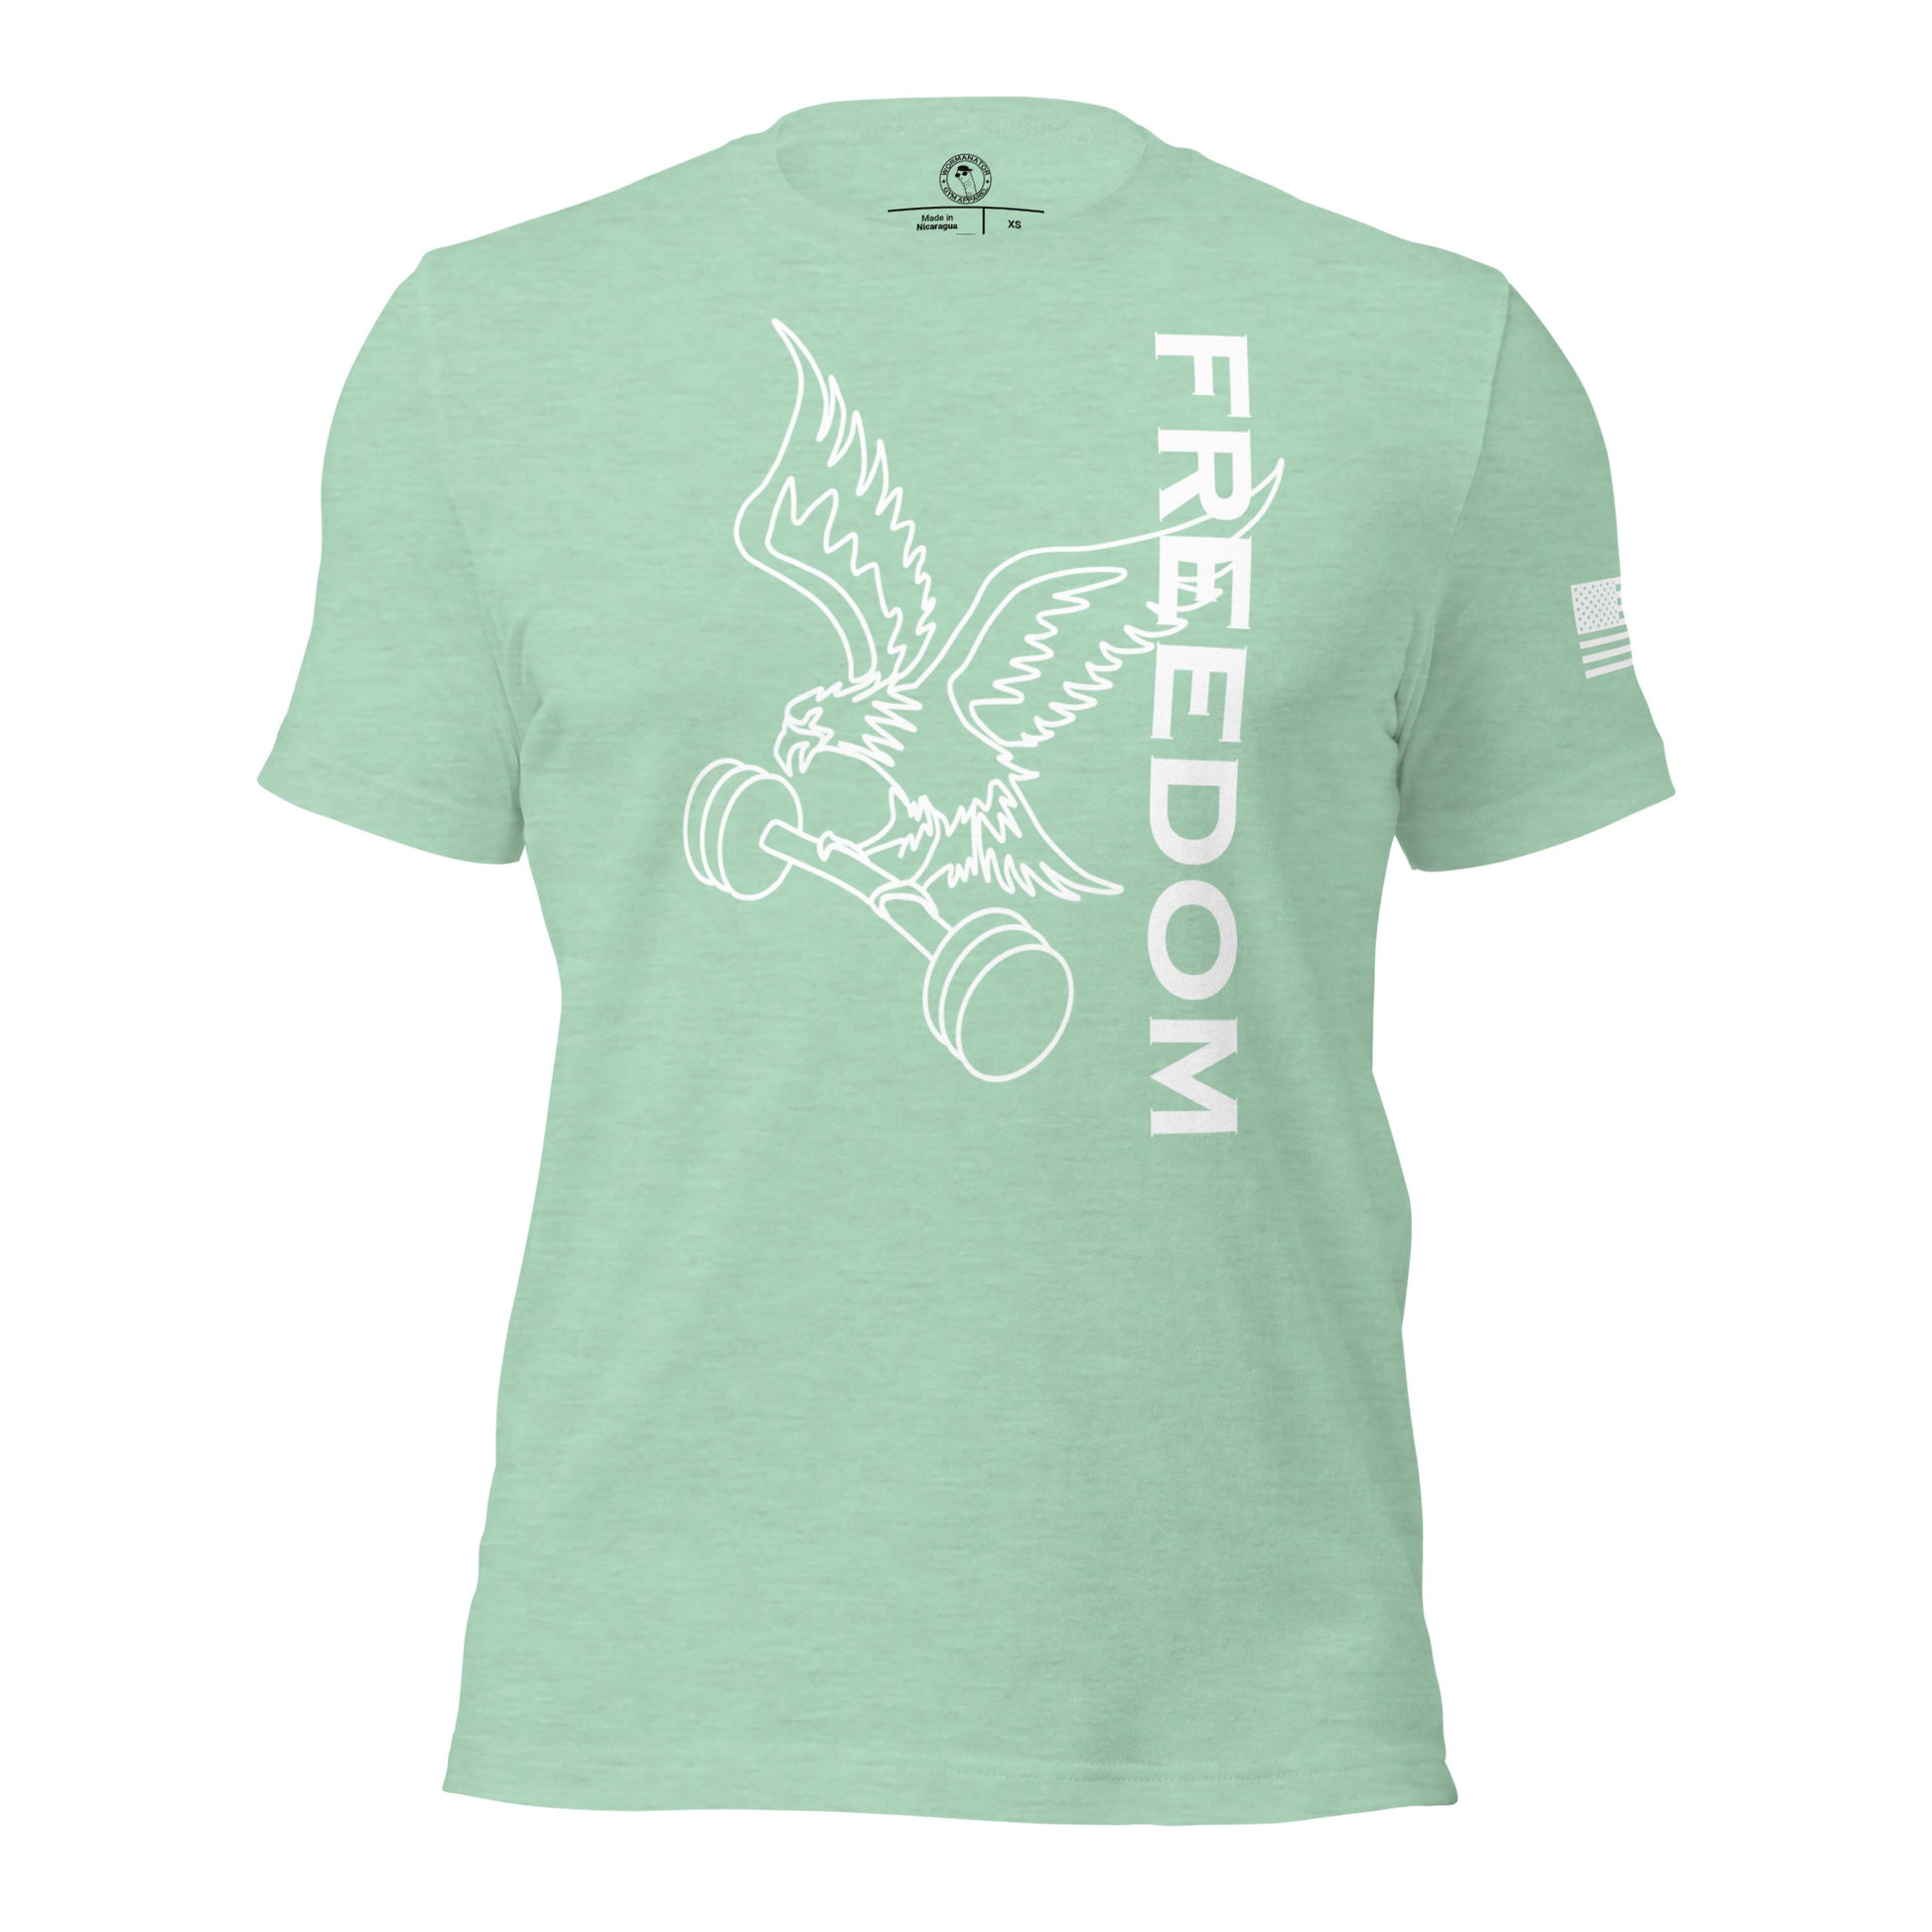 Reversed Freedom Eagle Barbell Shirt in Heather Prism Mint